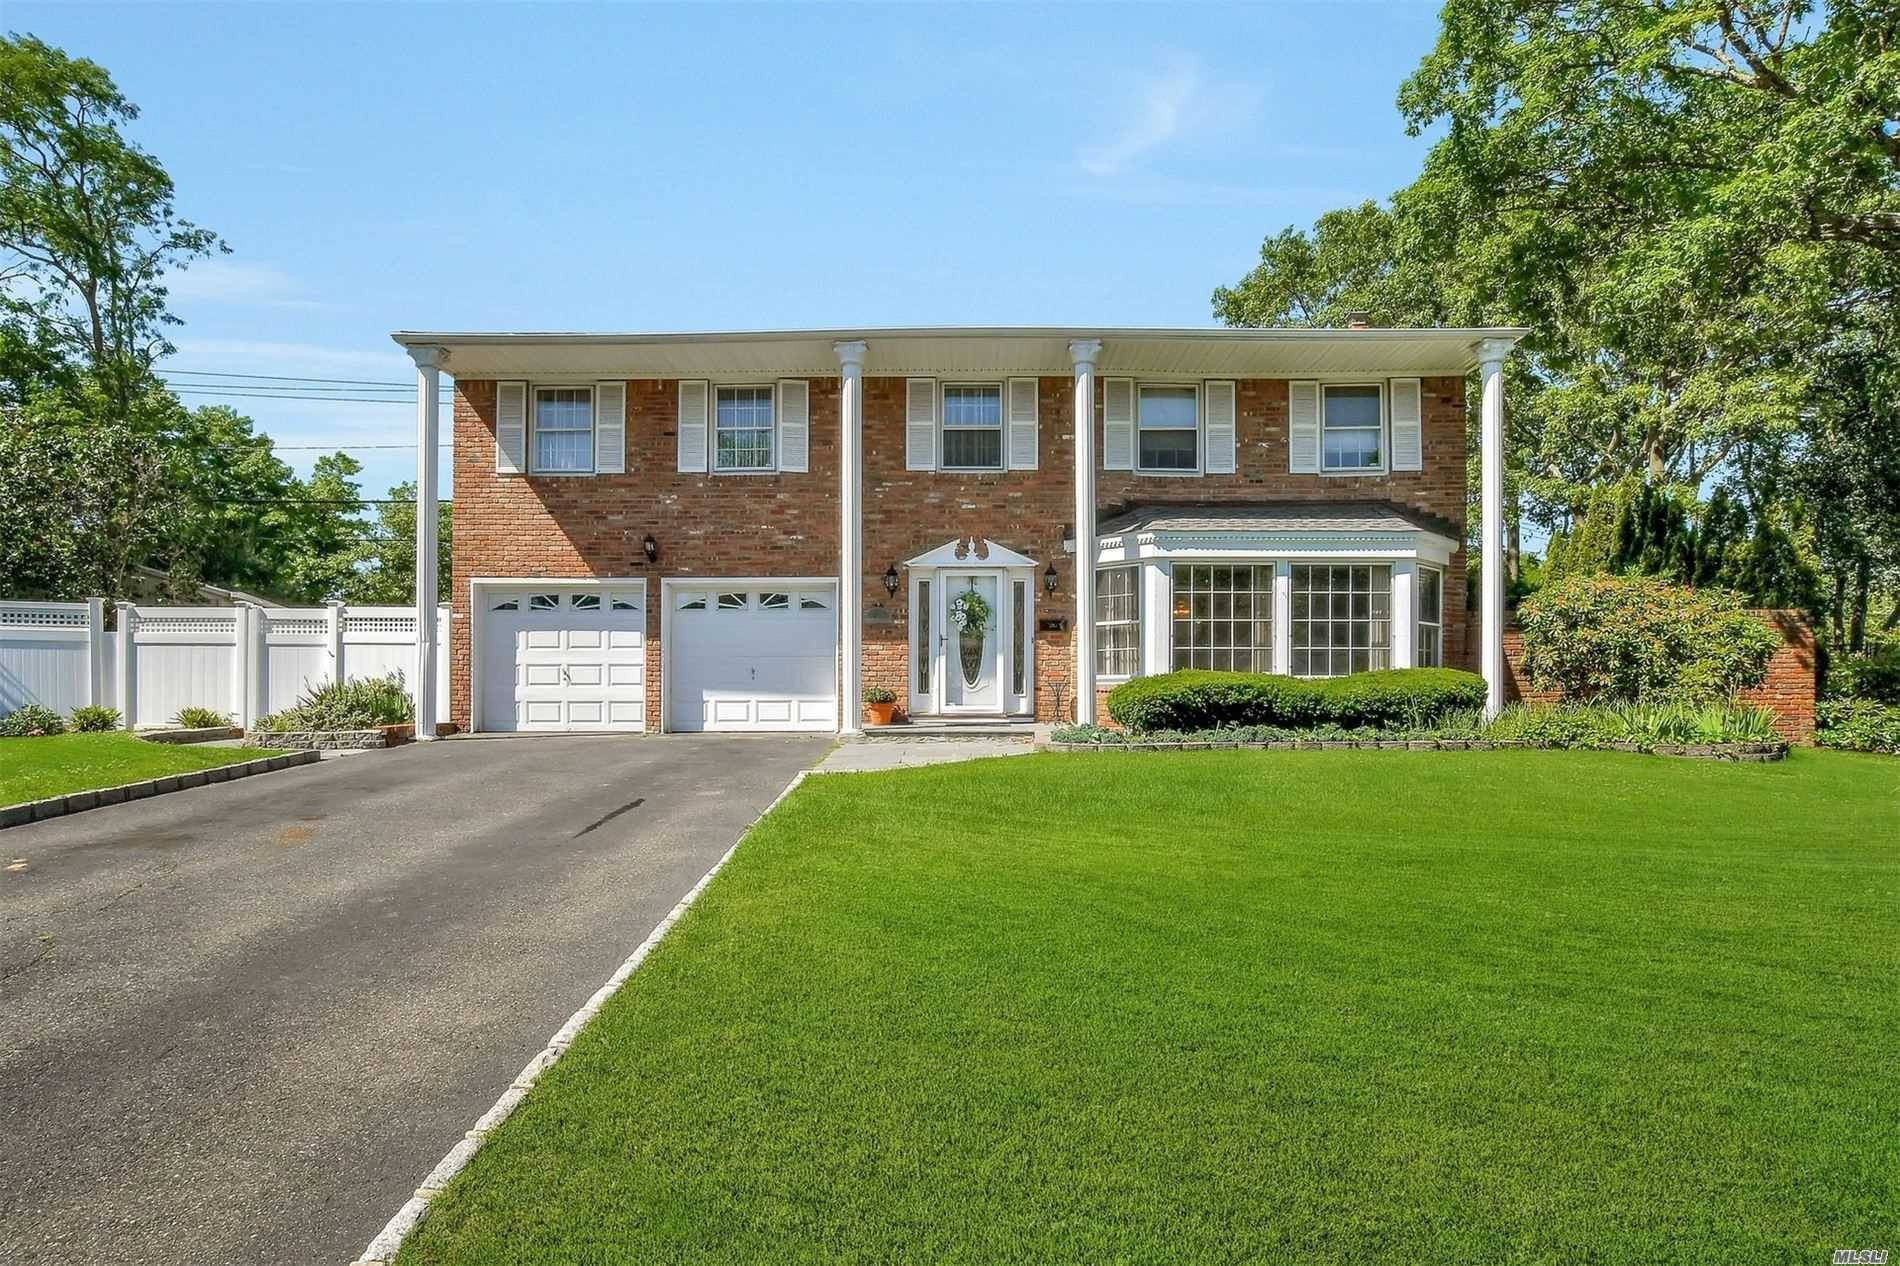 Magnificent Brookfield Colonial in Win Oaks blacktop driveway w Cobblestone borders Full front brick exterior white columns 7 year young roof Open flr plan custom wd molding recessed lighting updated ...